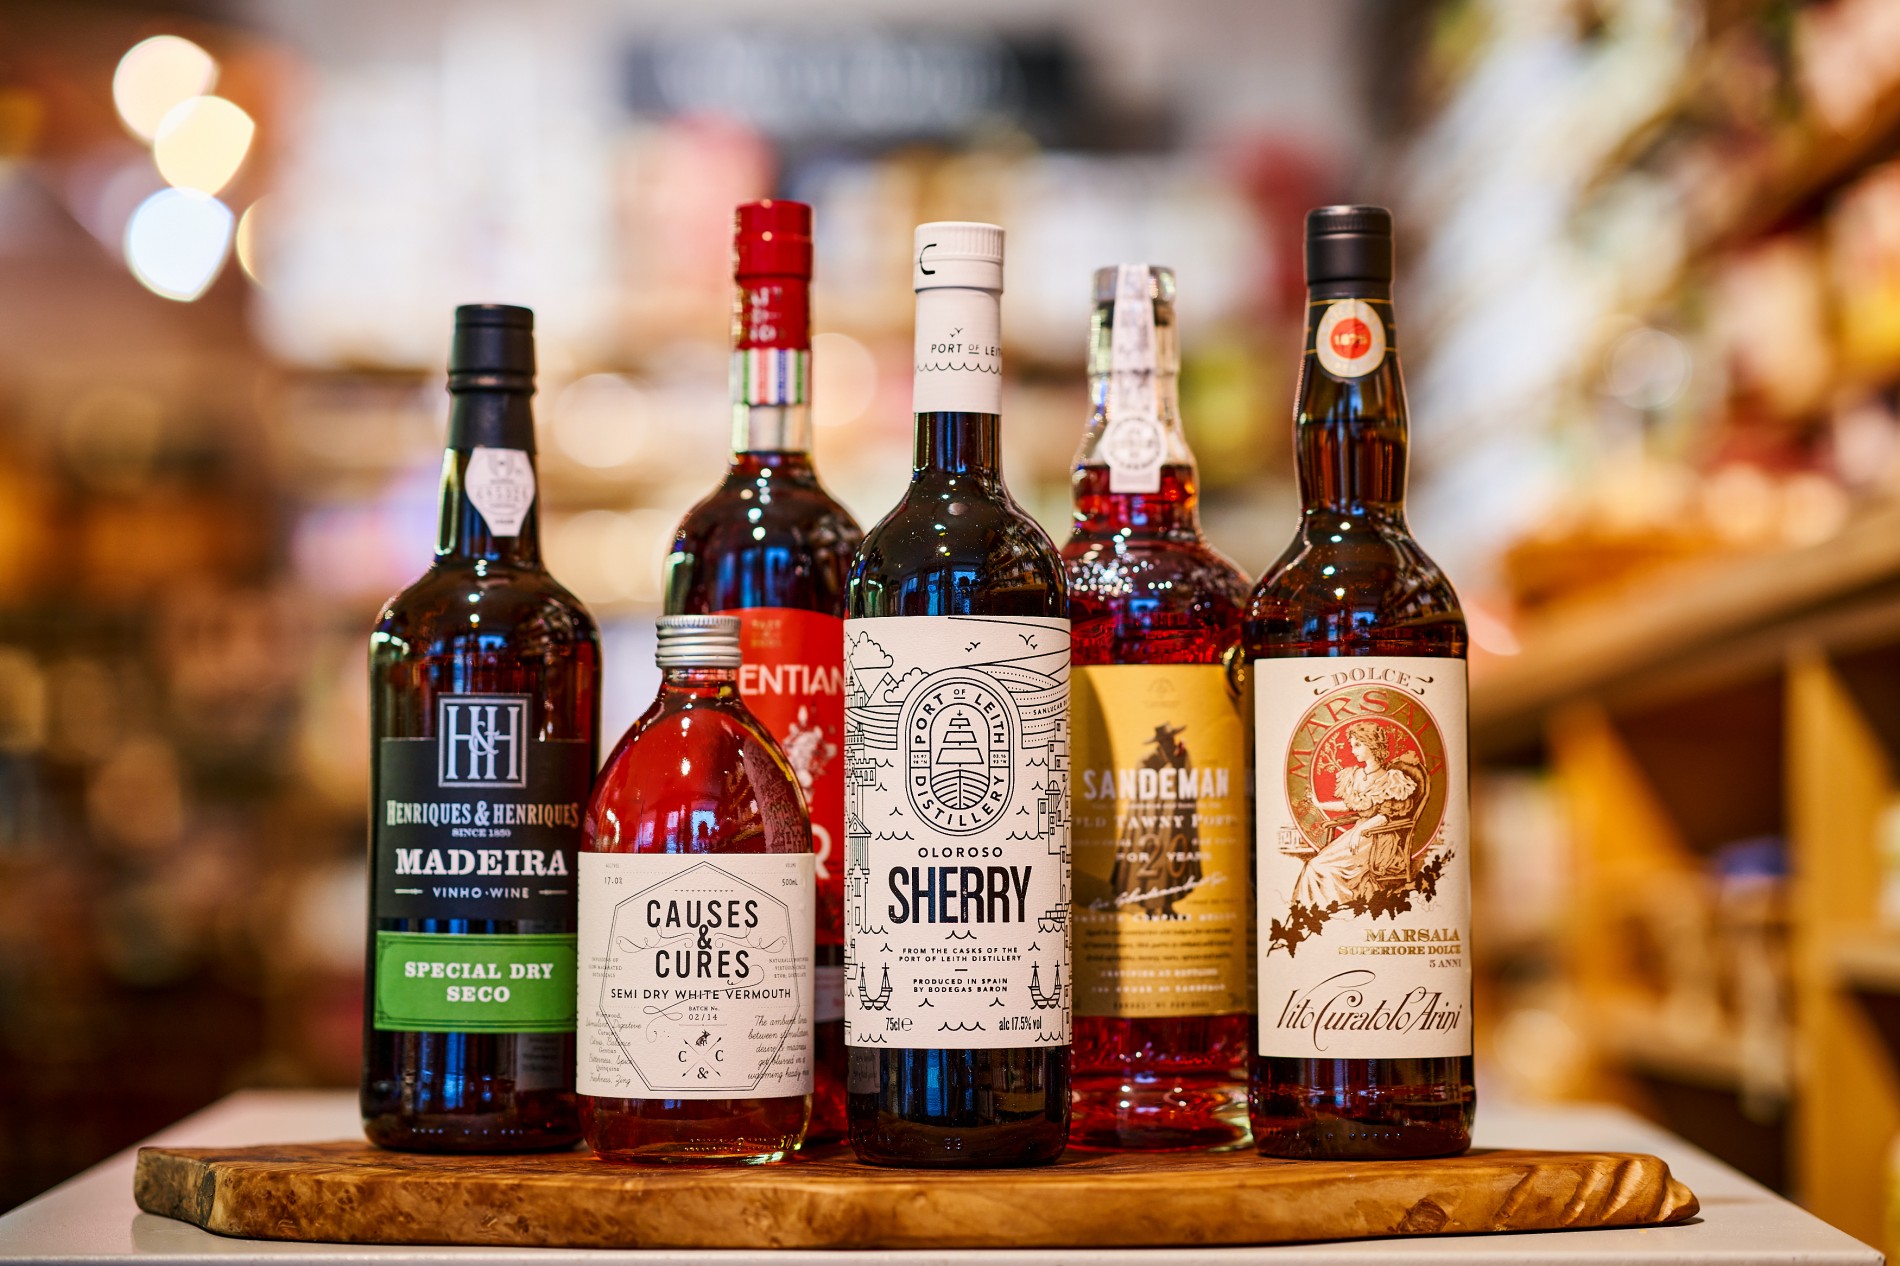 Fortified Wines & Vermouth